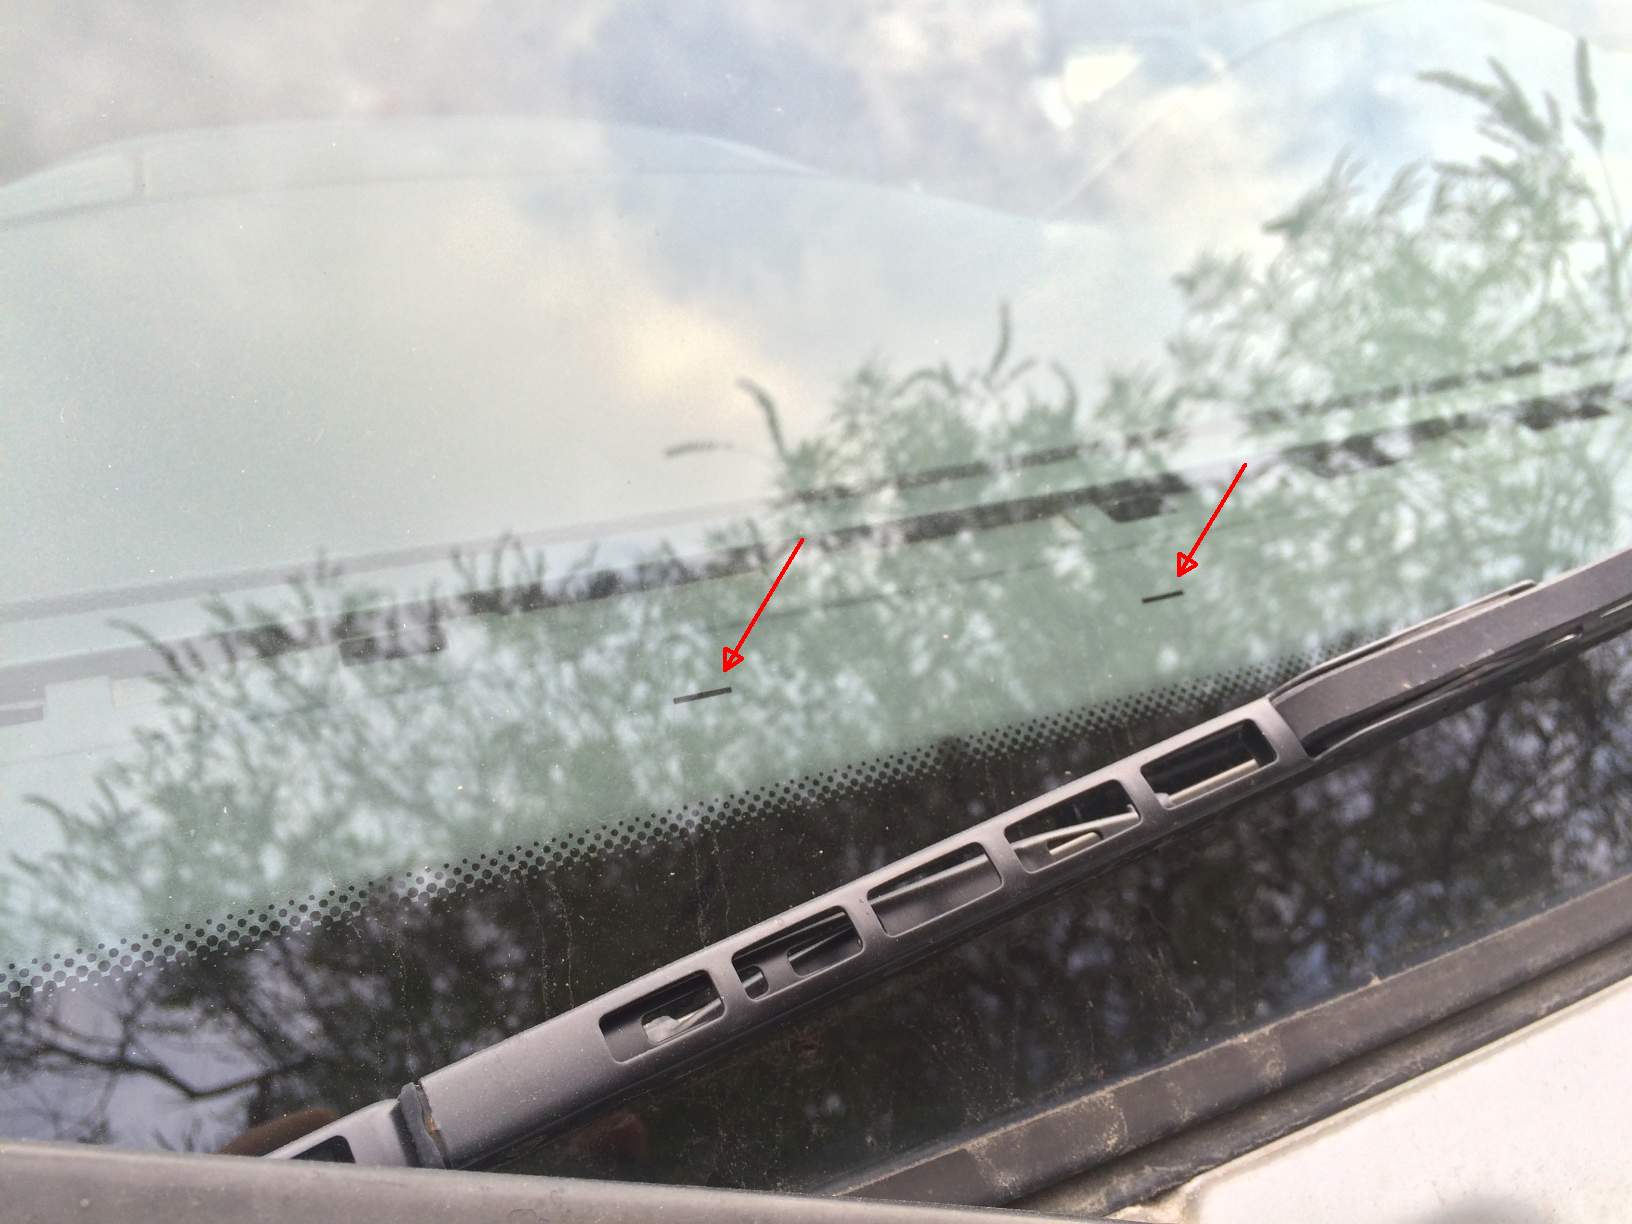 Wiper alignment marks on the windshield